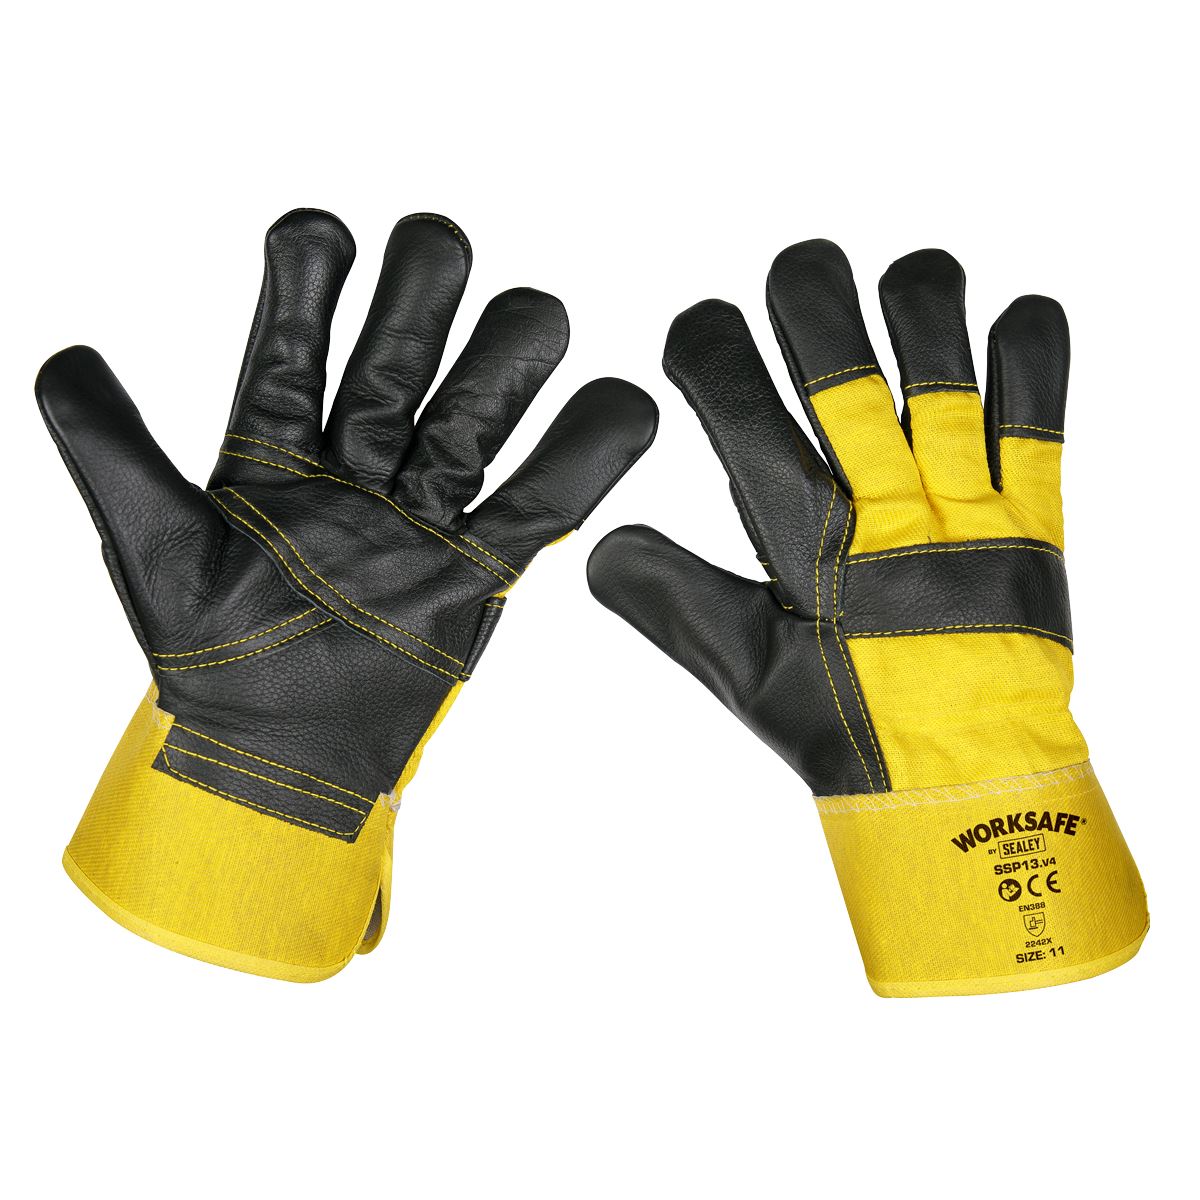 Worksafe by Sealey Rigger's Gloves Hide Palm - Pack of 6 Pairs